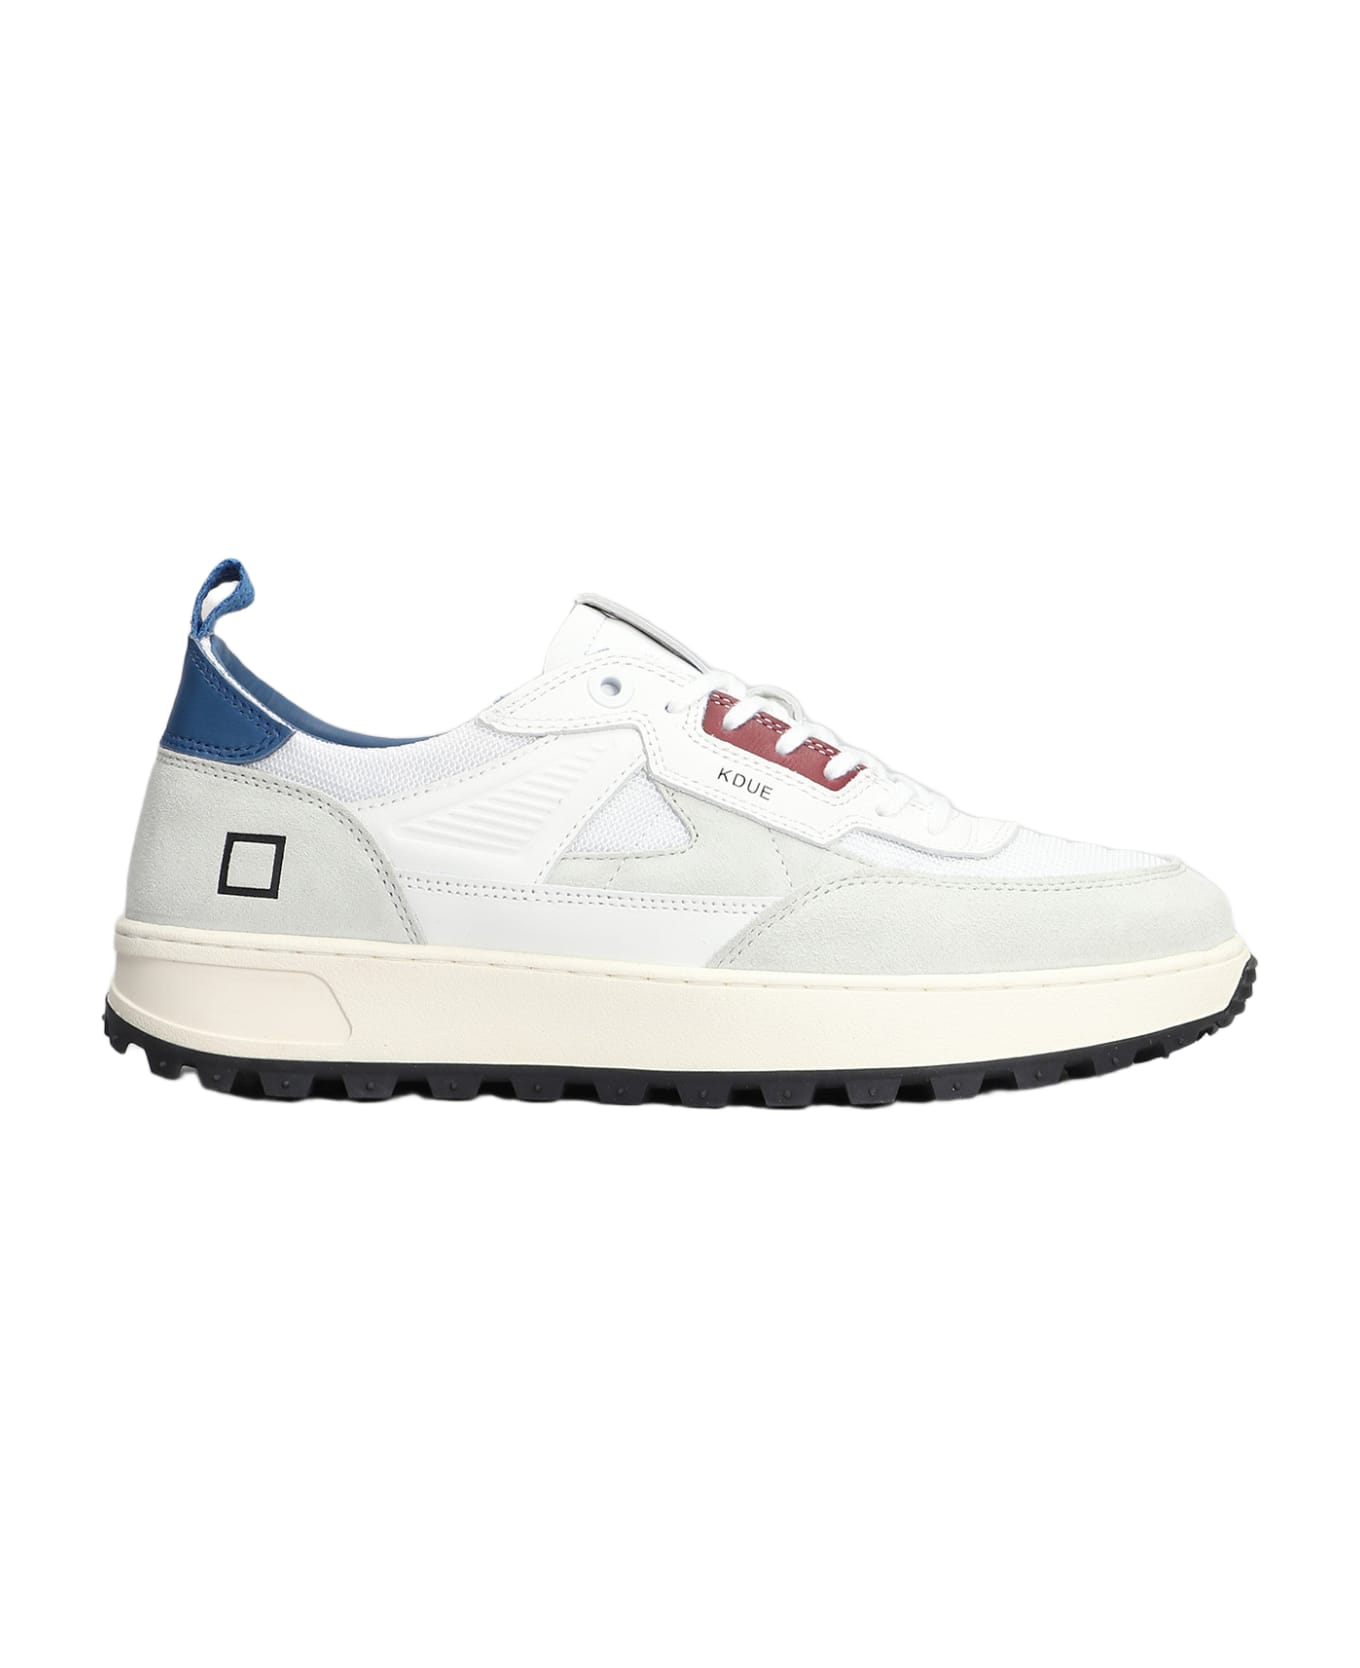 D.A.T.E. Kdue Sneakers In White Leather And Fabric - white スニーカー